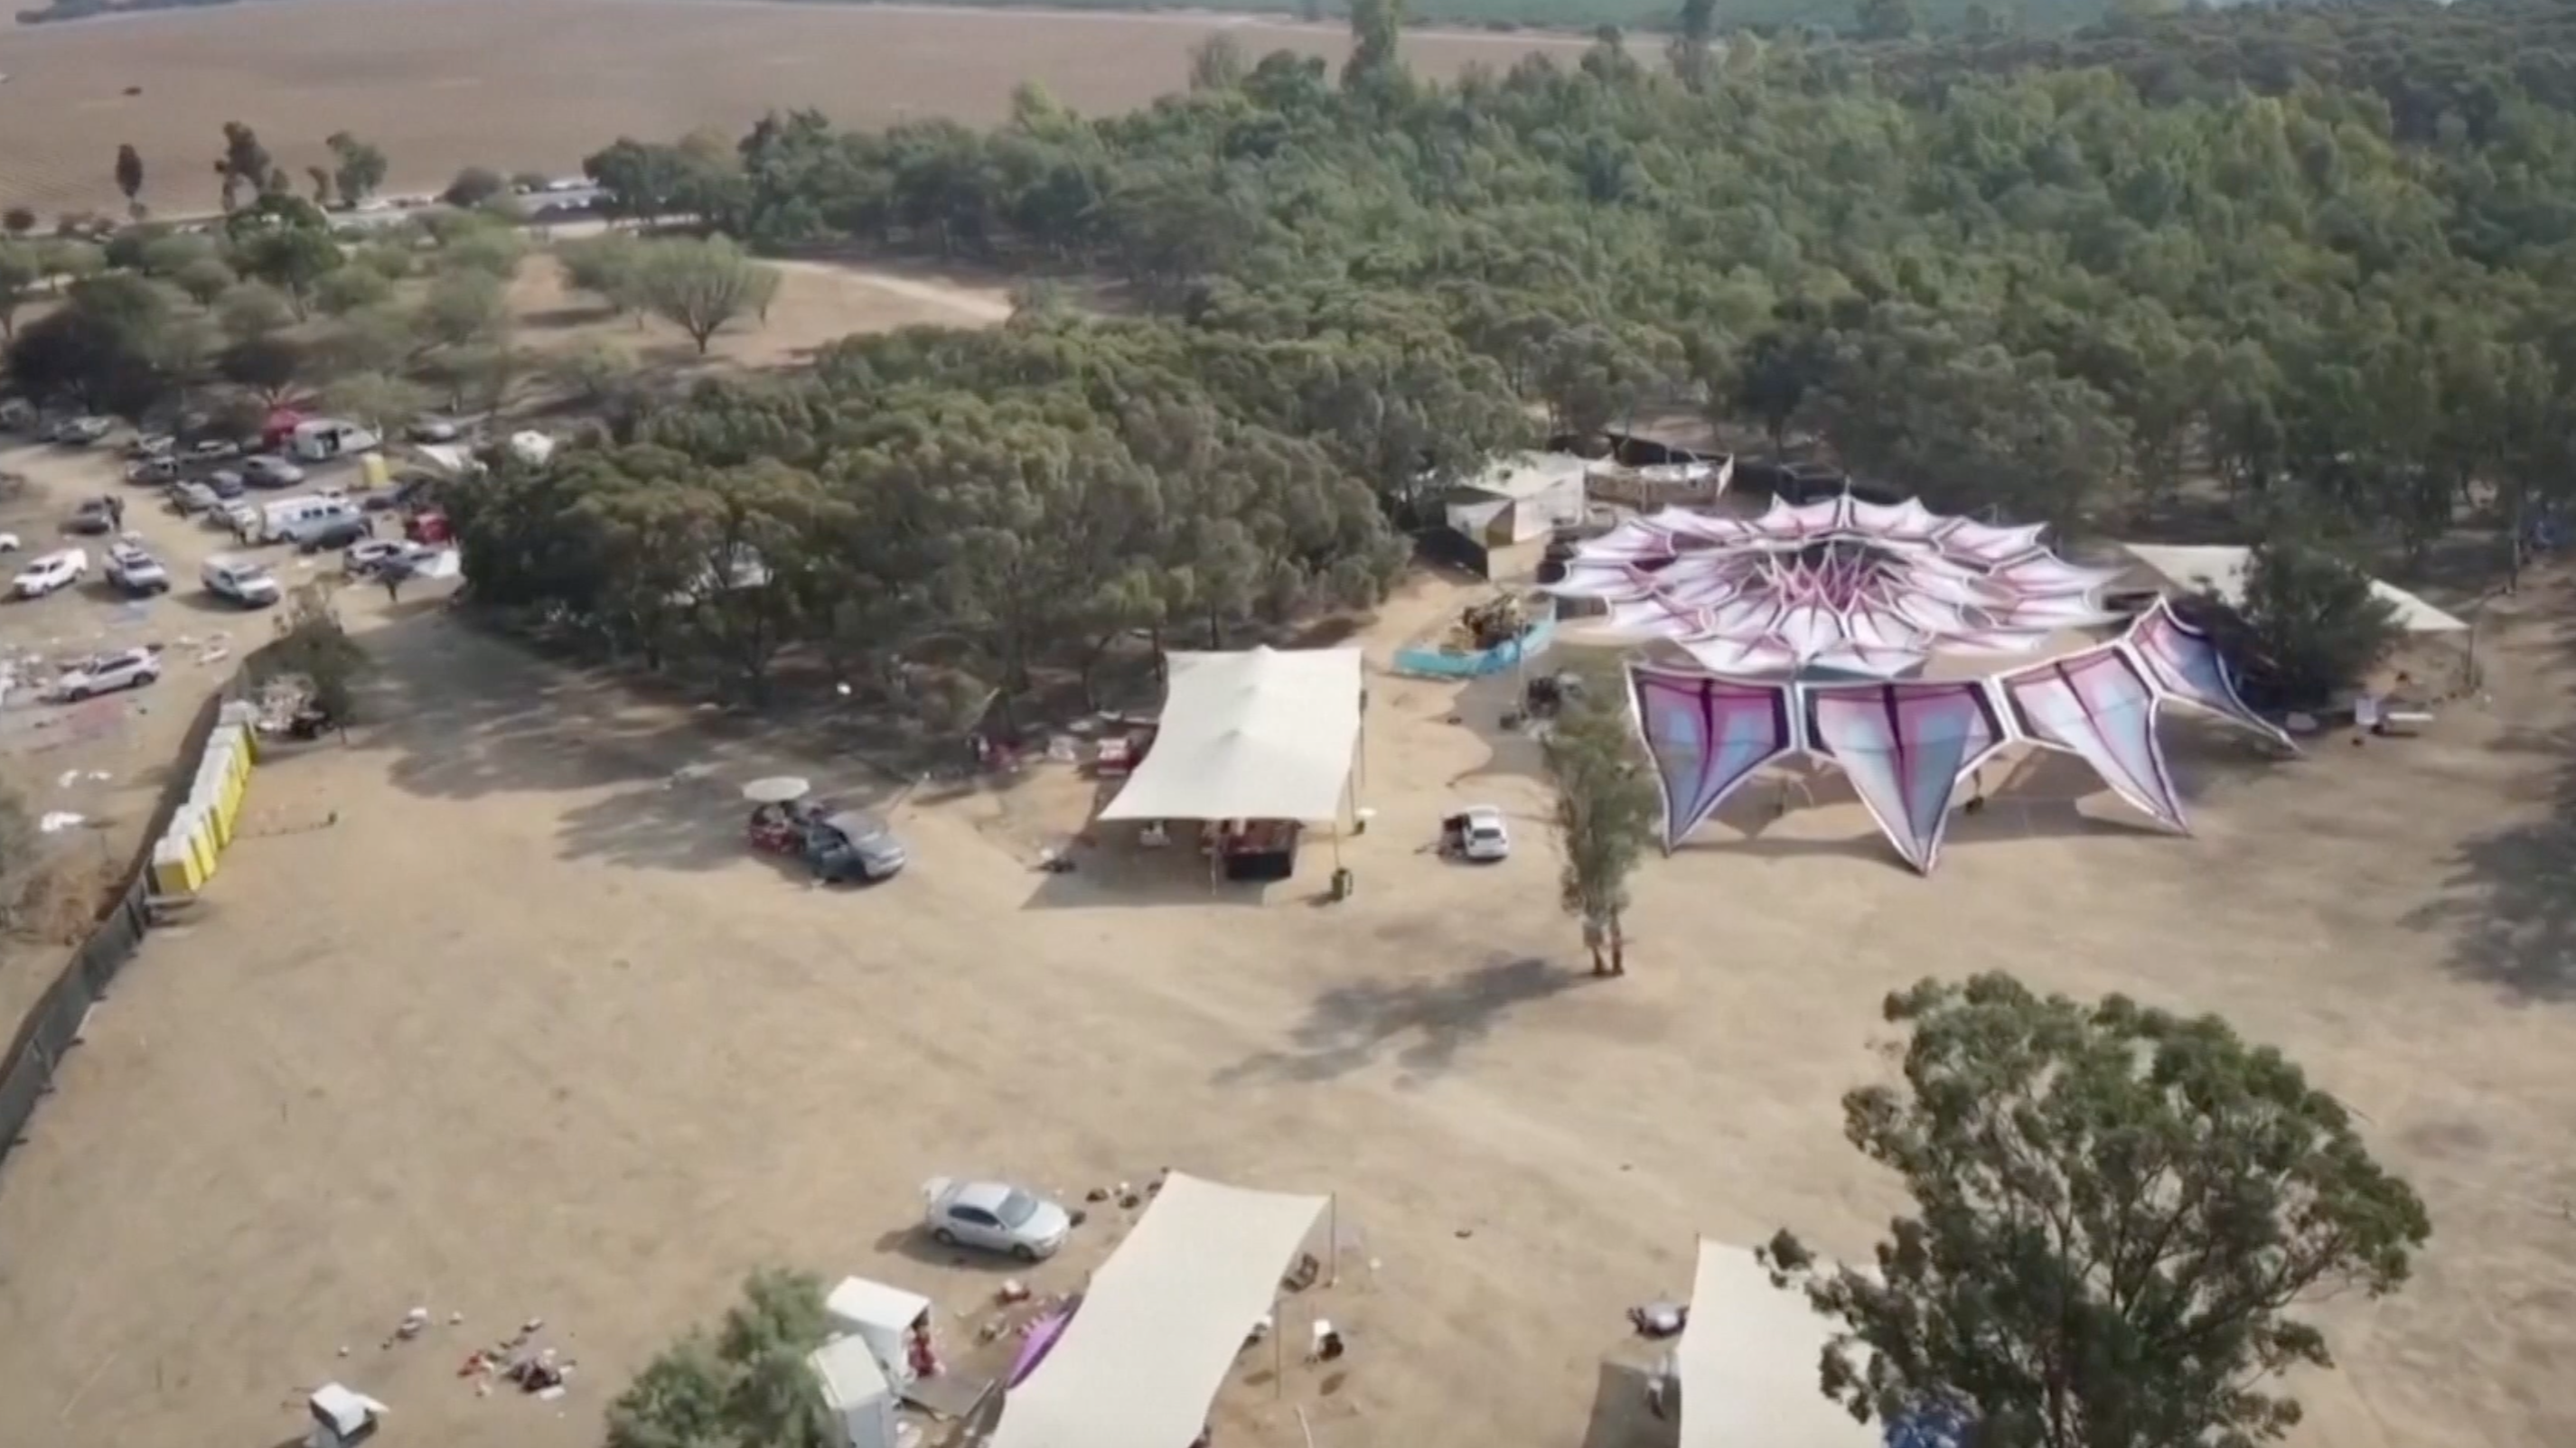 Phone footage showing the moment Hamas paragliders attacked a desert festival in Israel on Saturday